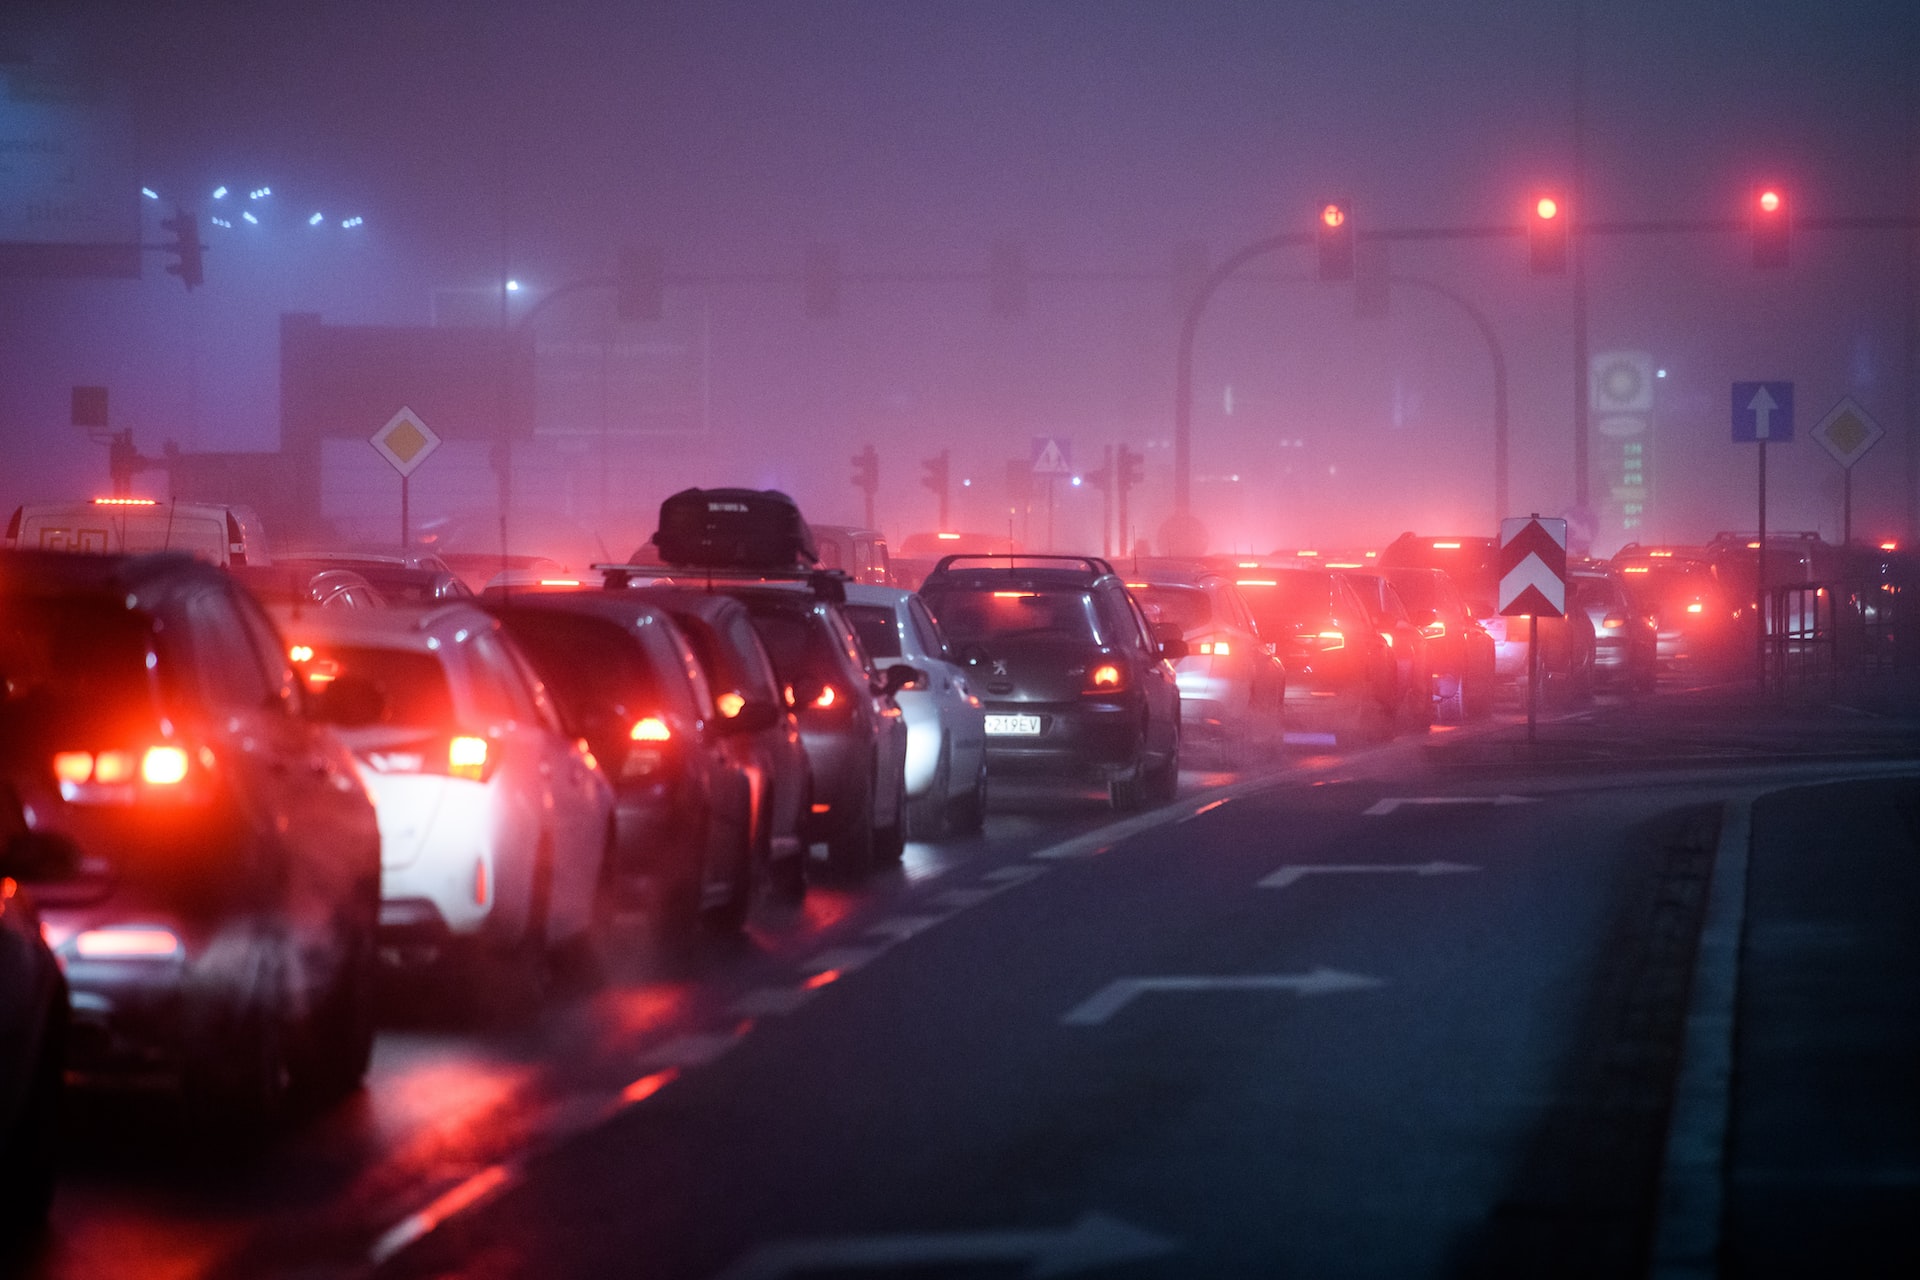 Row of cars in polluted air